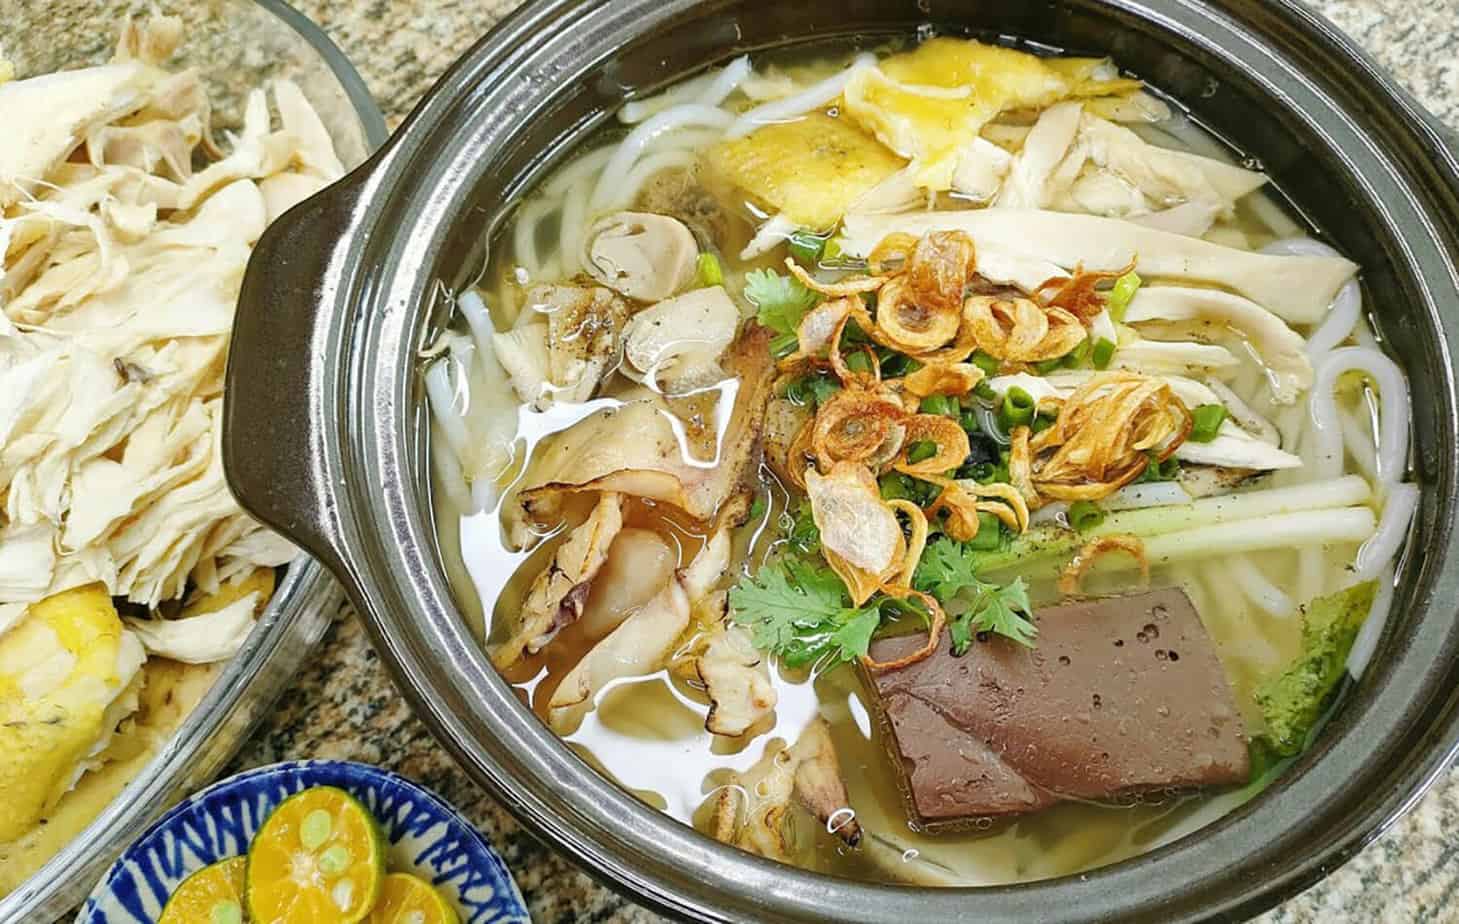 Banh Canh - A popular noodle soup in Vietnam